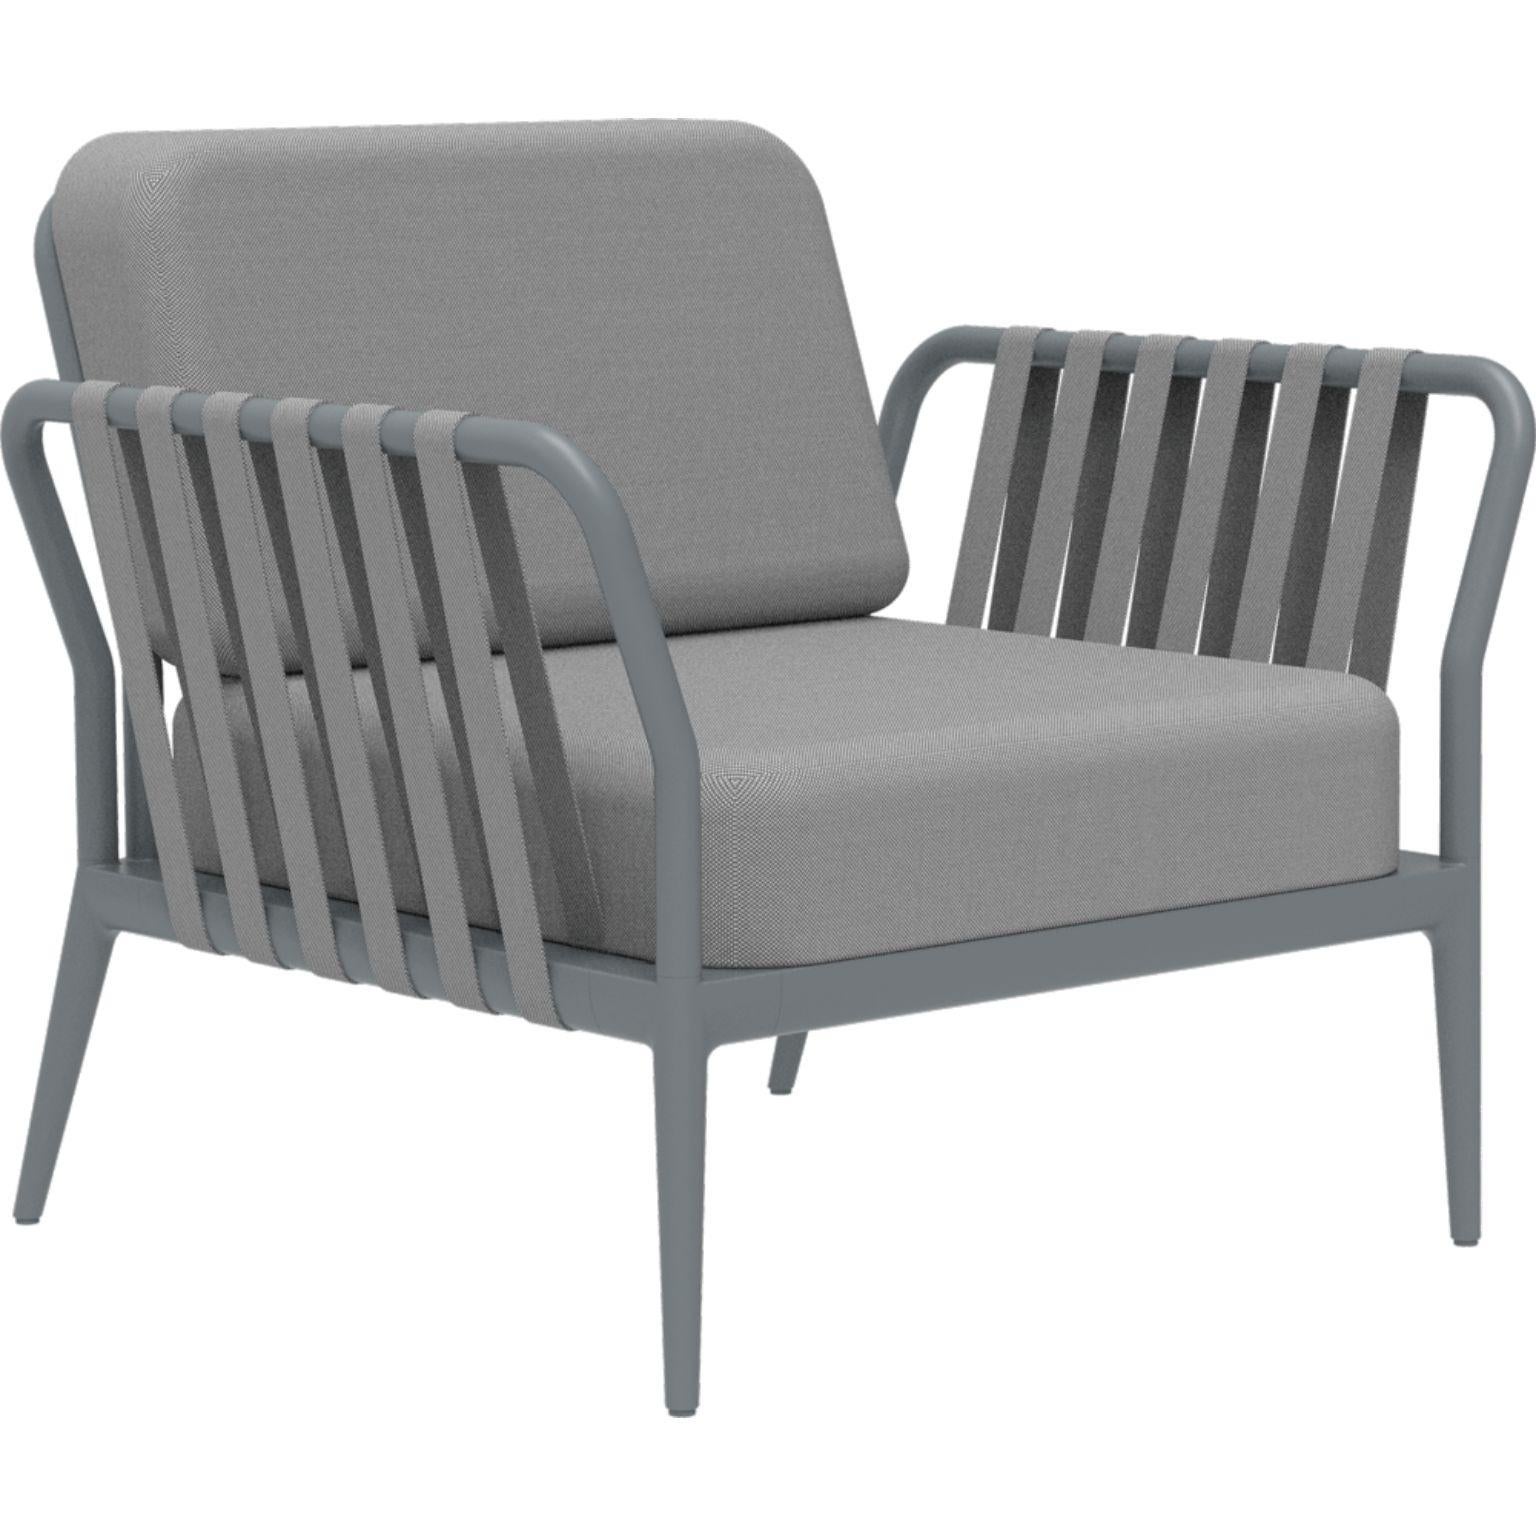 Ribbons grey armchair by Mowee.
Dimensions: D83 x W91 x H81 cm (Seat Height 42 cm).
Material: Aluminium, upholstery.
Weight: 20 kg
Also Available in different colours and finishes.

An unmistakable collection for its beauty and robustness. A